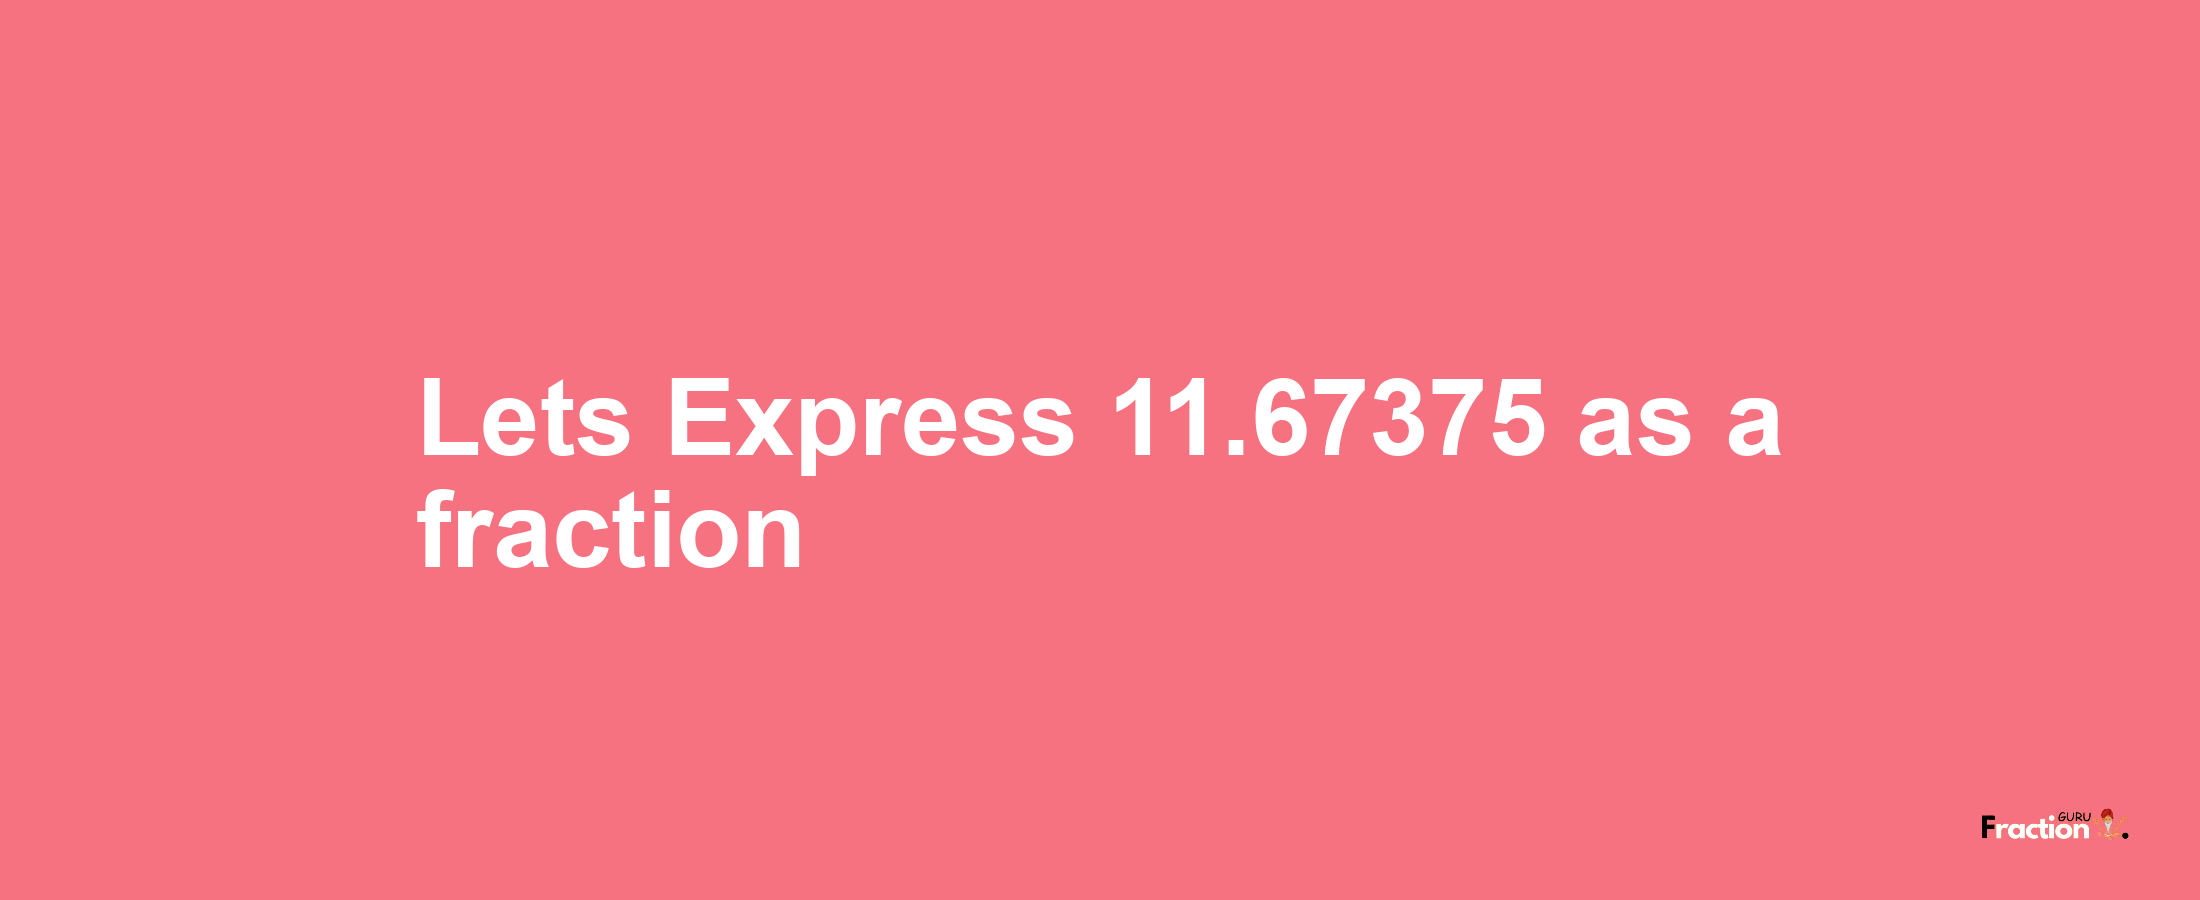 Lets Express 11.67375 as afraction